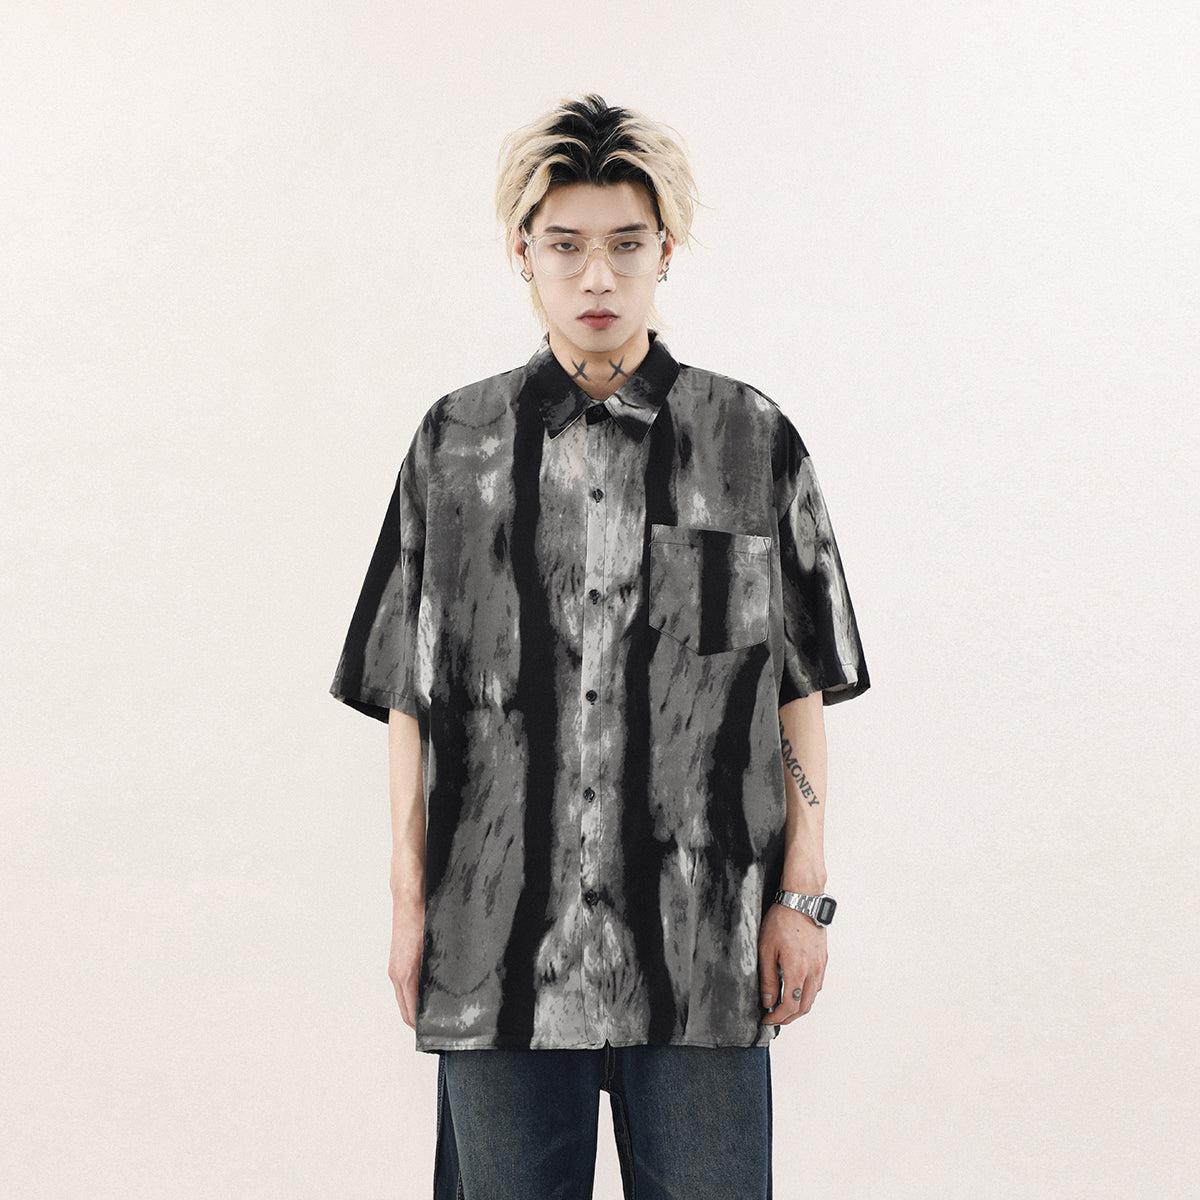 Mr Nearly Casual Ink Stripes Shirt Korean Street Fashion Shirt By Mr Nearly Shop Online at OH Vault